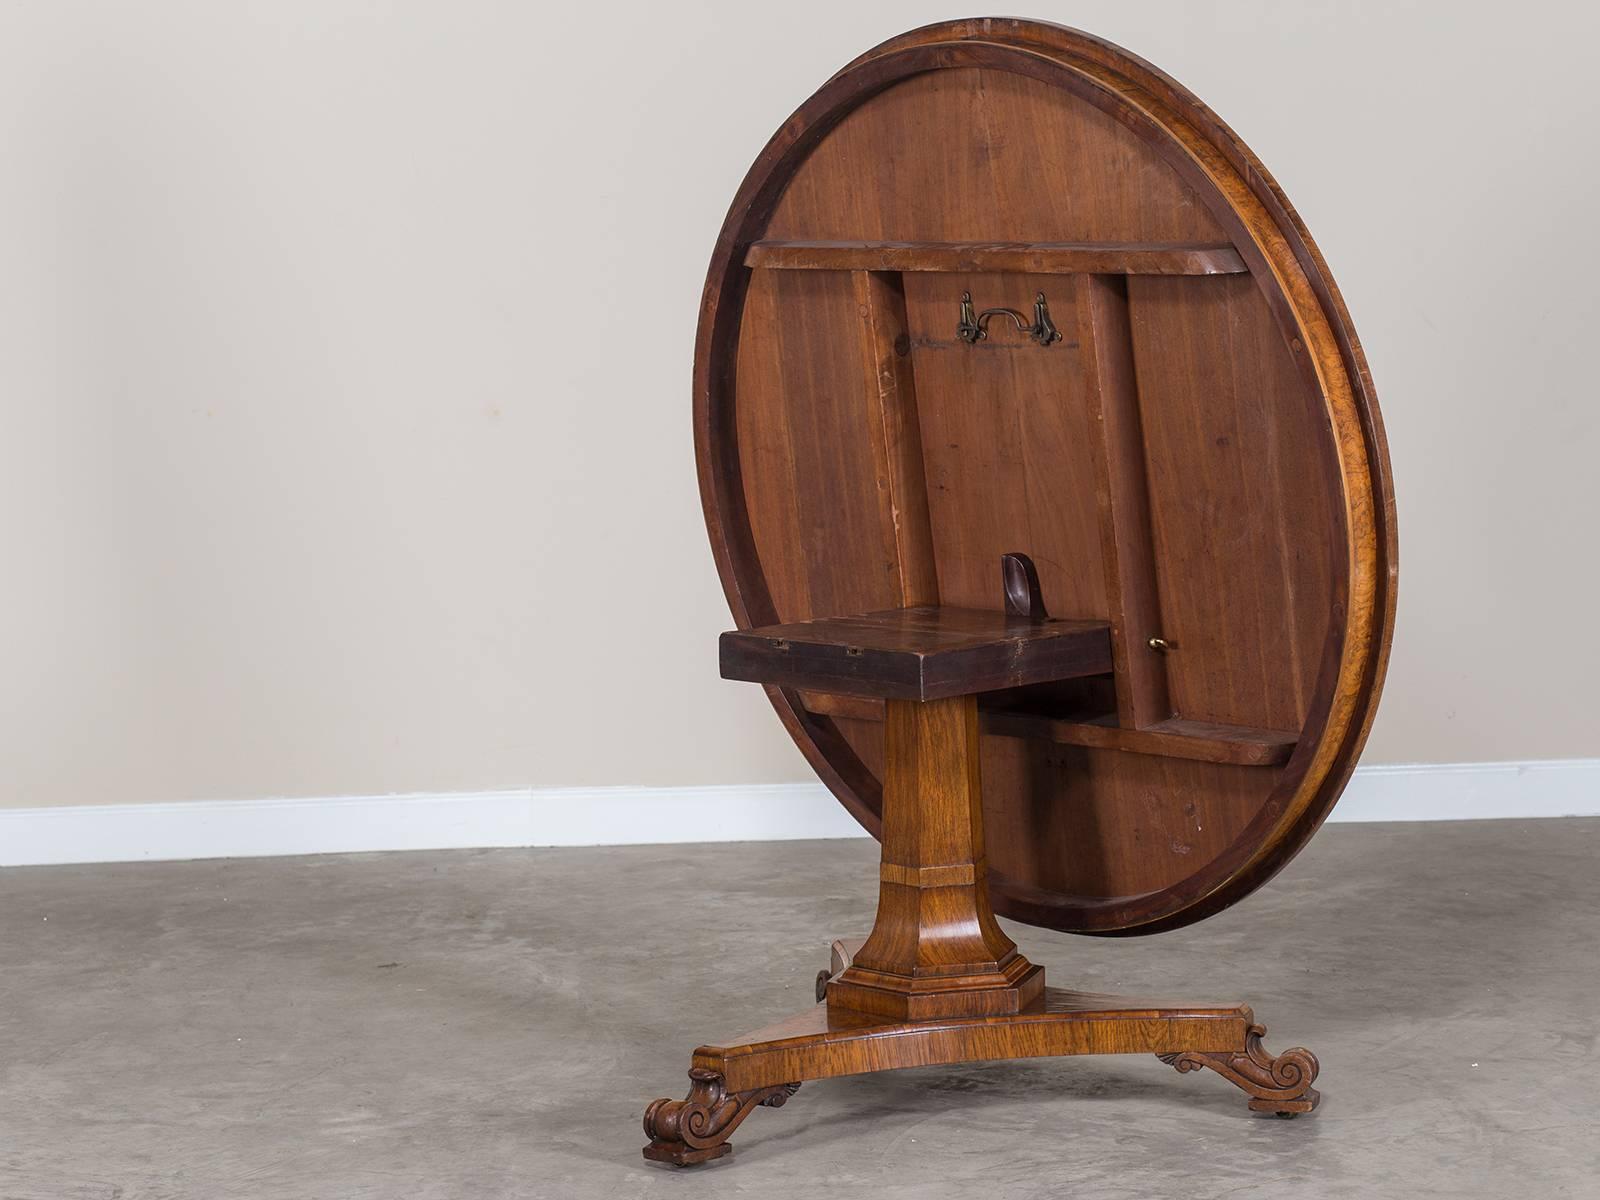 Receive our new selections direct from 1stdibs by email each week. Please click Follow Dealer below and see them first!

This William IV period tilt-top table circa 1840 features a superb combination of rare timber and craftsmanship. Pollard oak